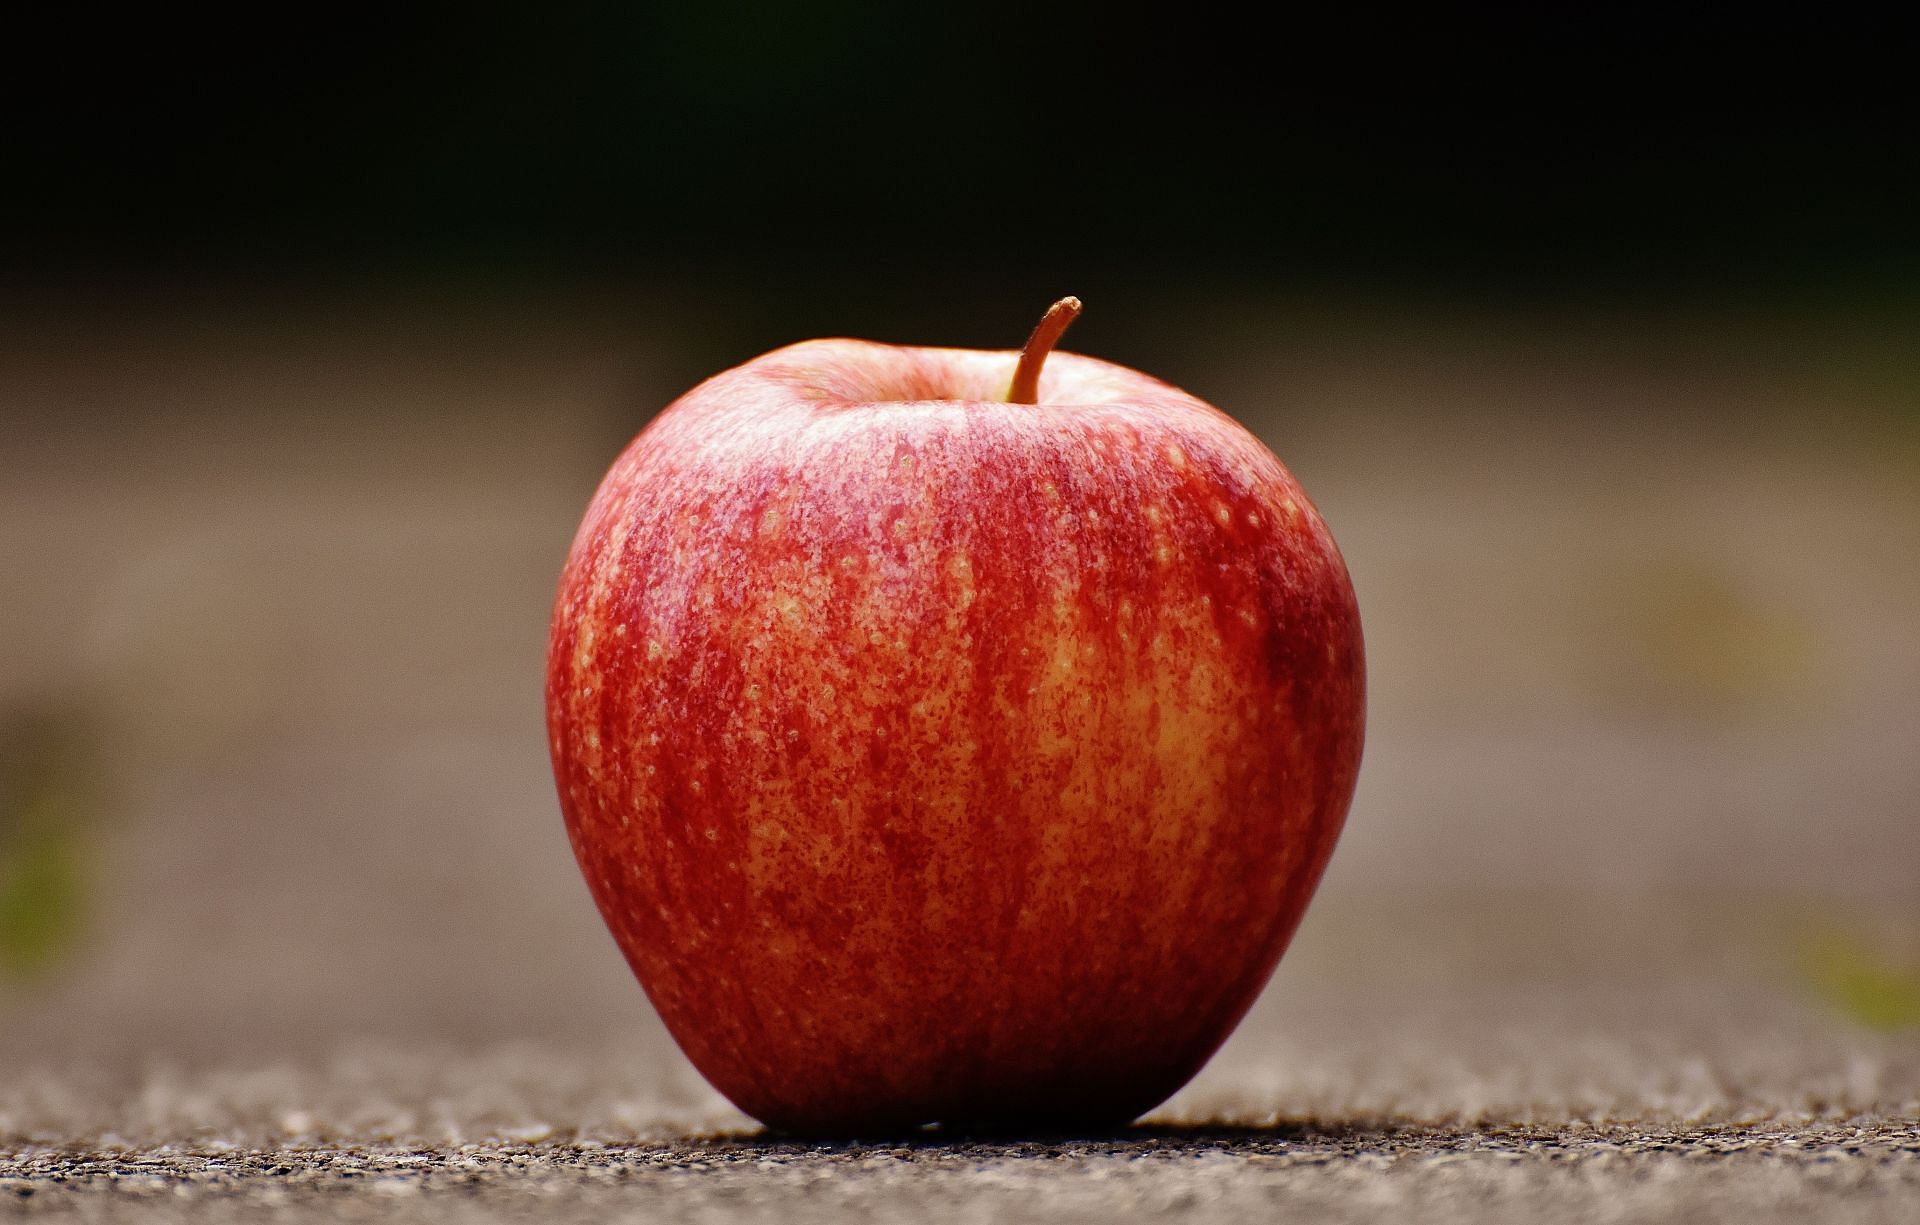 Apples are an excellent and nutritious fruit (Image via Pexels @Pixabay)